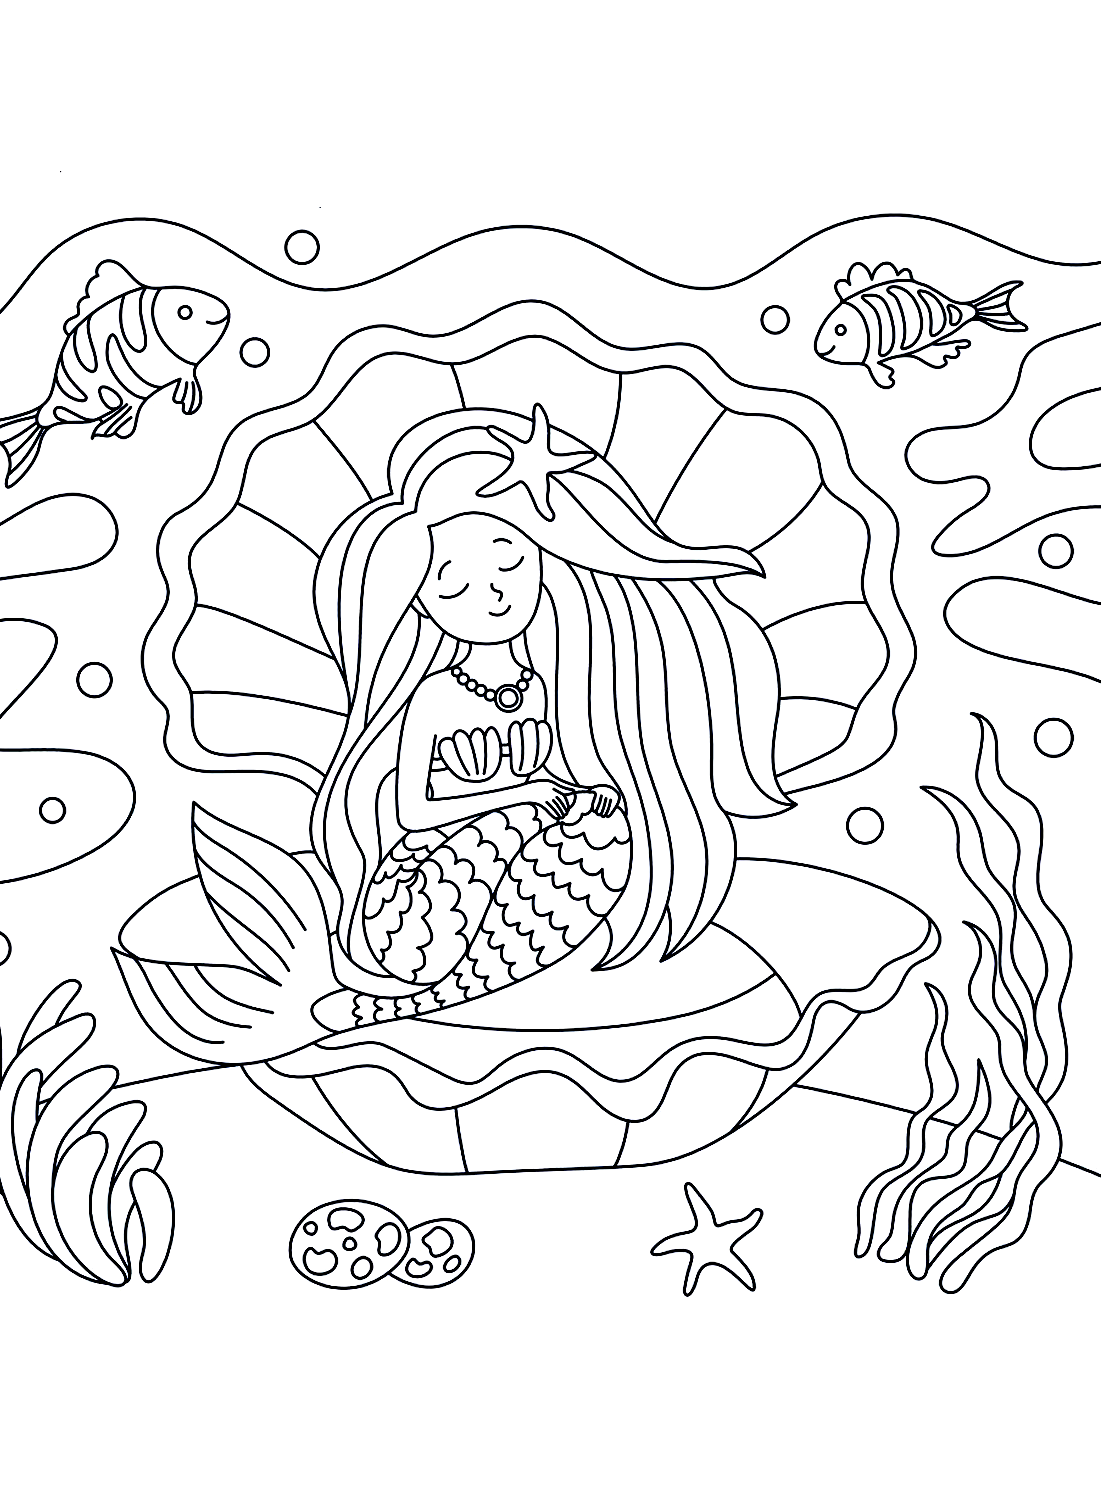 Ocean and Mermaid Coloring Pictures